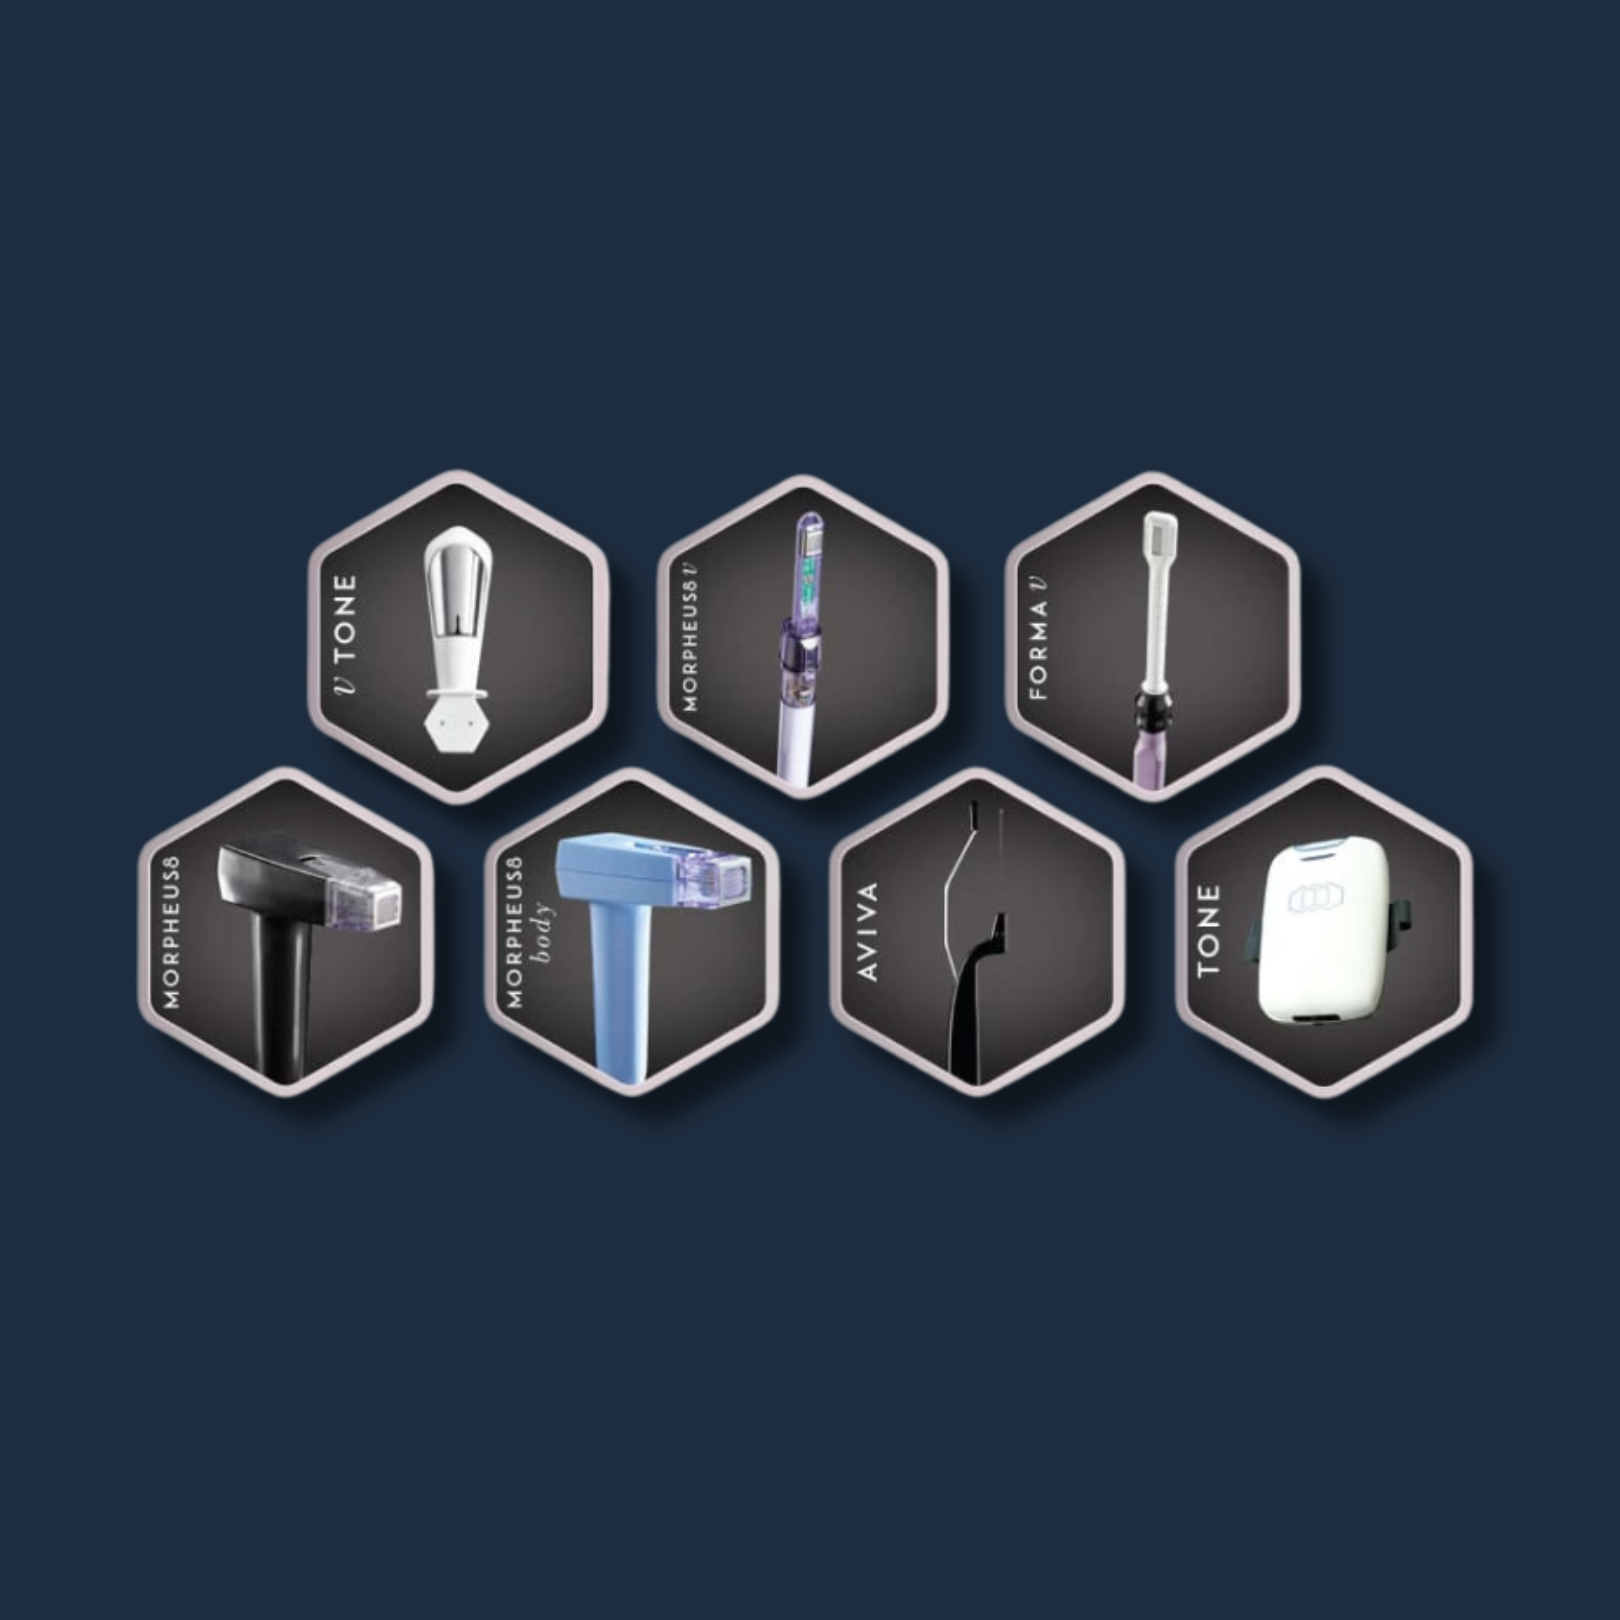 vive-empowerrf-icons